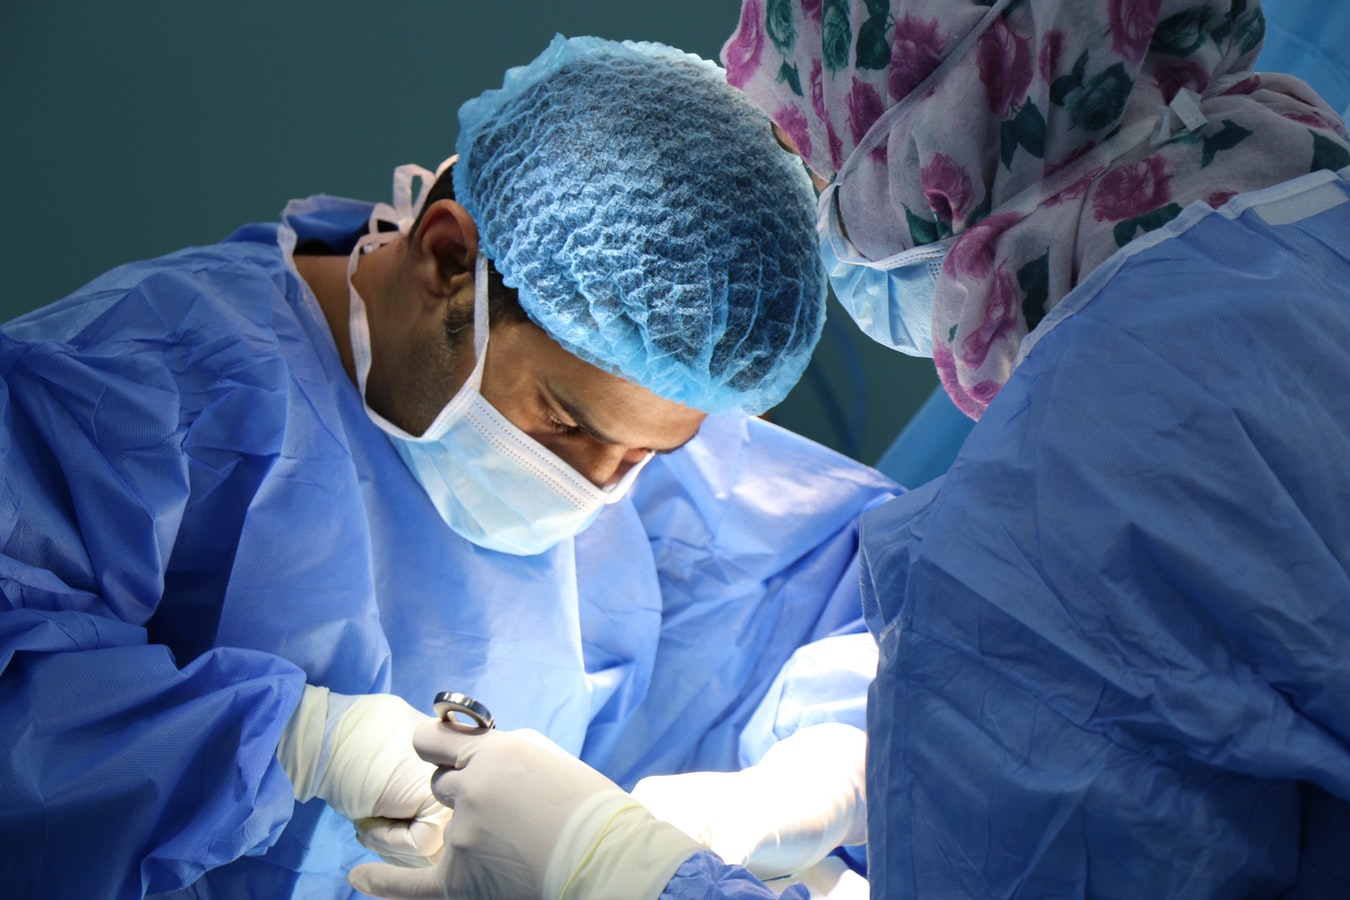 c-section-most-performed-surgery-in-india-report